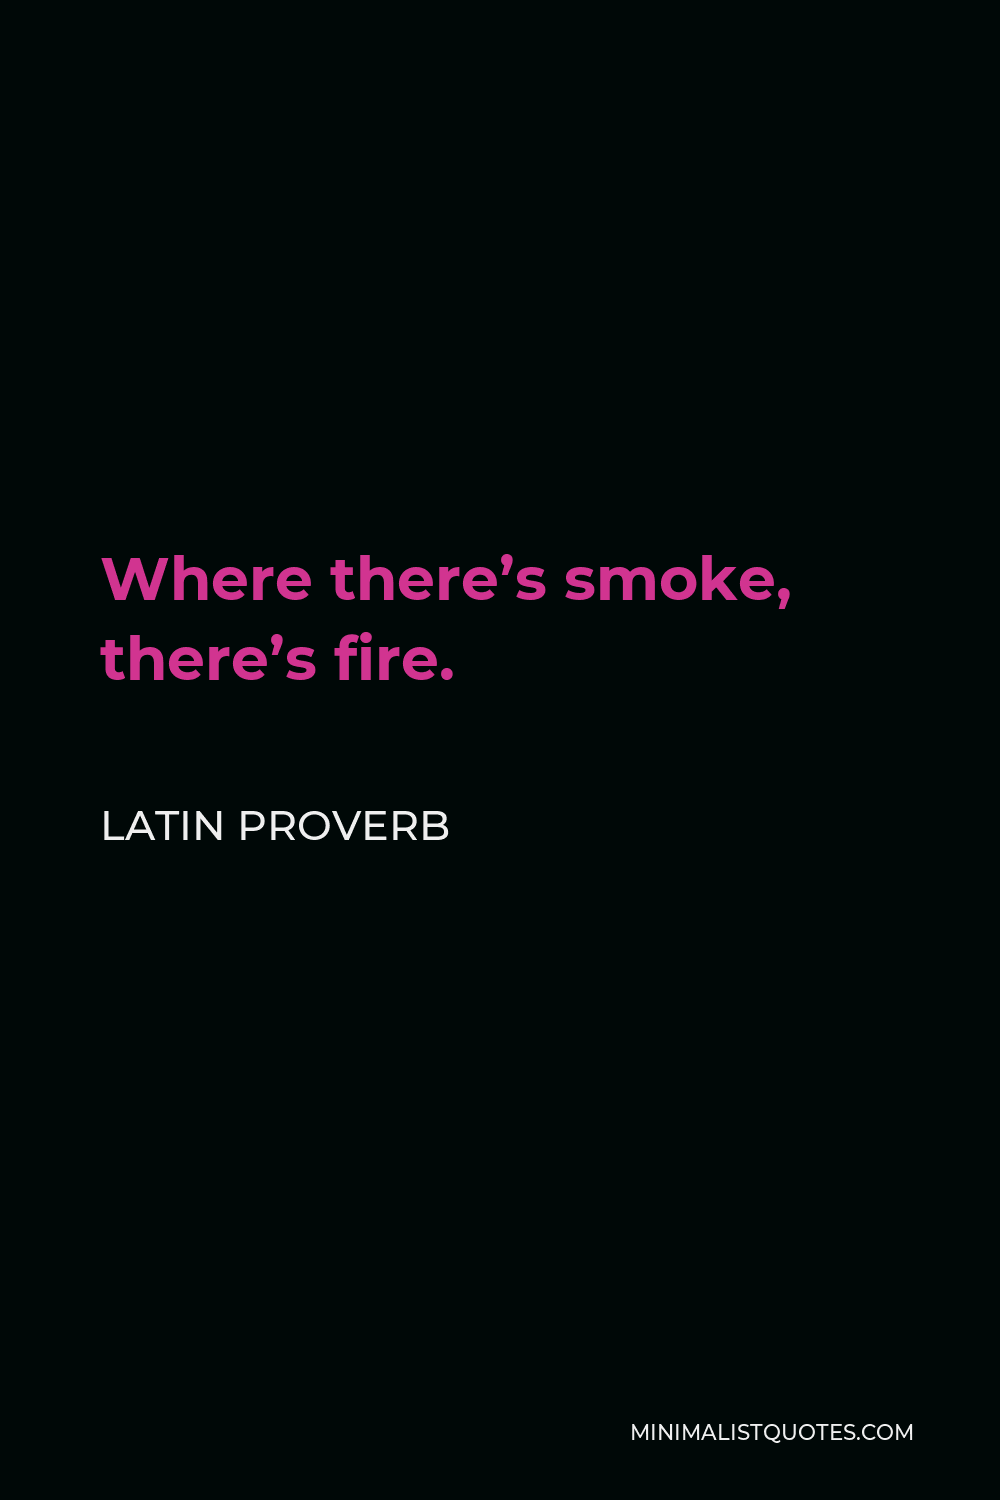 Latin Proverb Quote - Where there’s smoke, there’s fire.